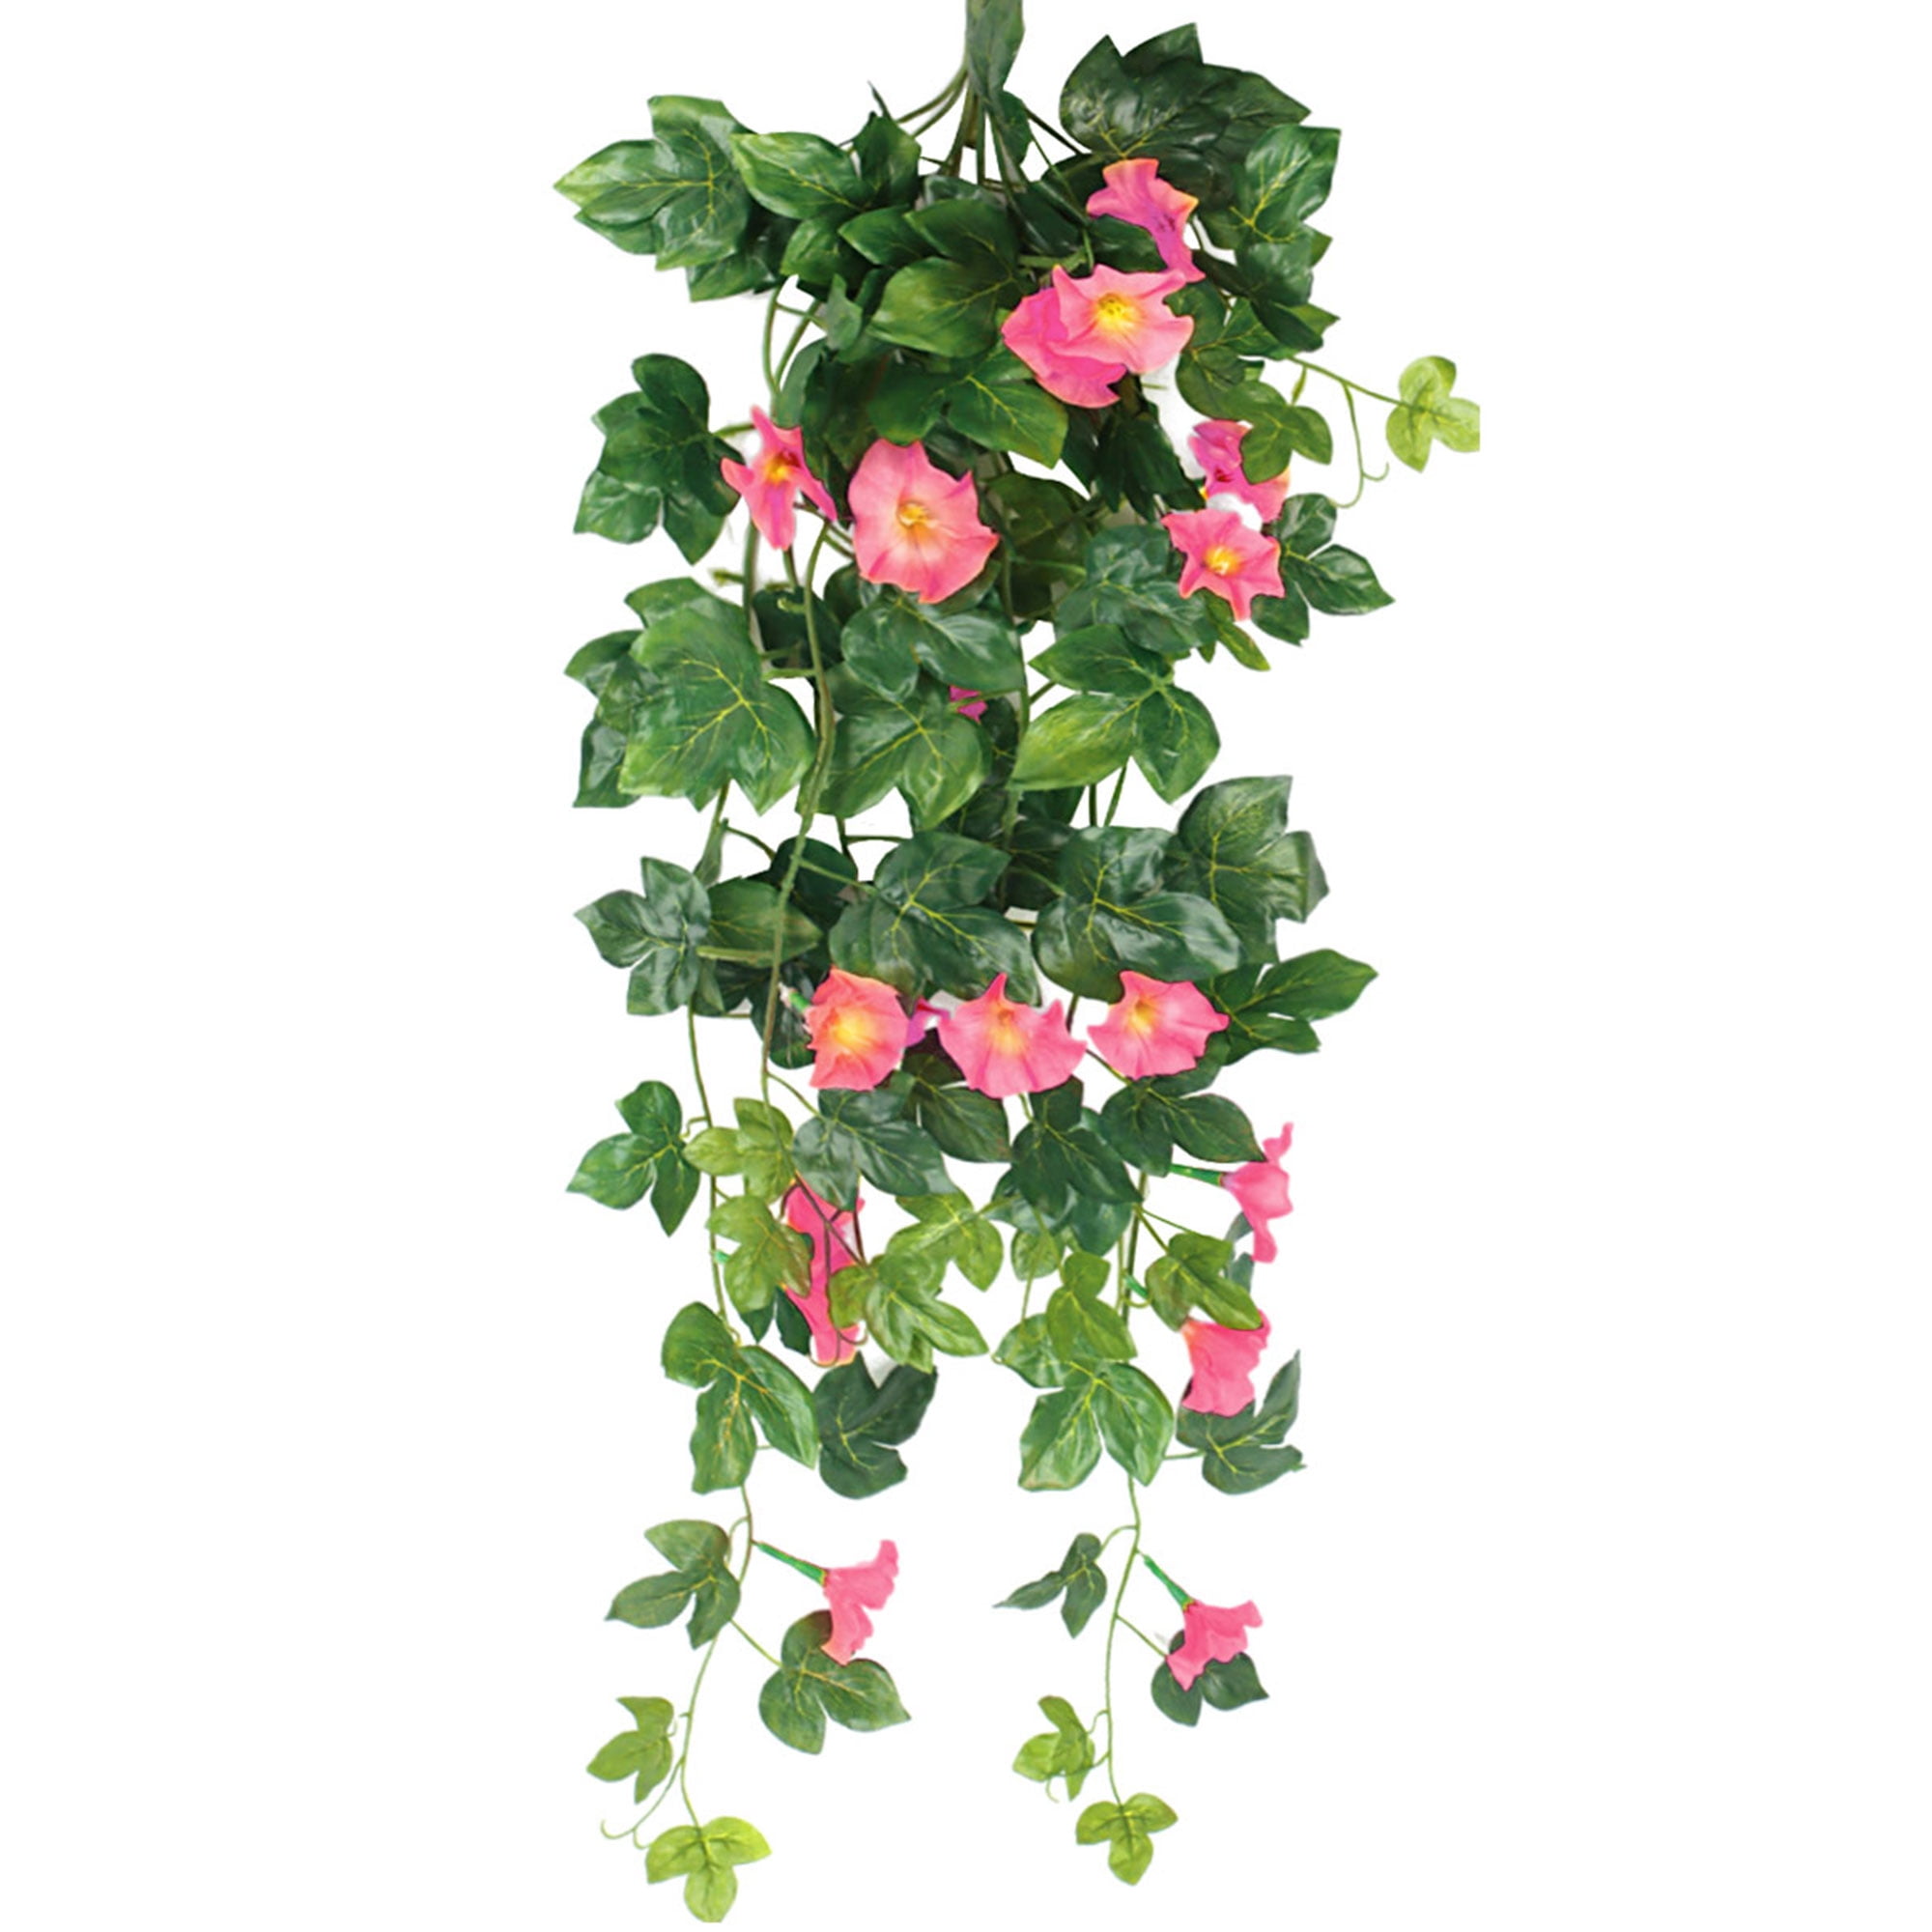 Haoyuetch 2PCS Artificial Rose Vine Flowers with Green Leaves,3Ft Hanging  Rose Ivy Plants for Home Wedding Party Garden Wall Decoration (Purple)